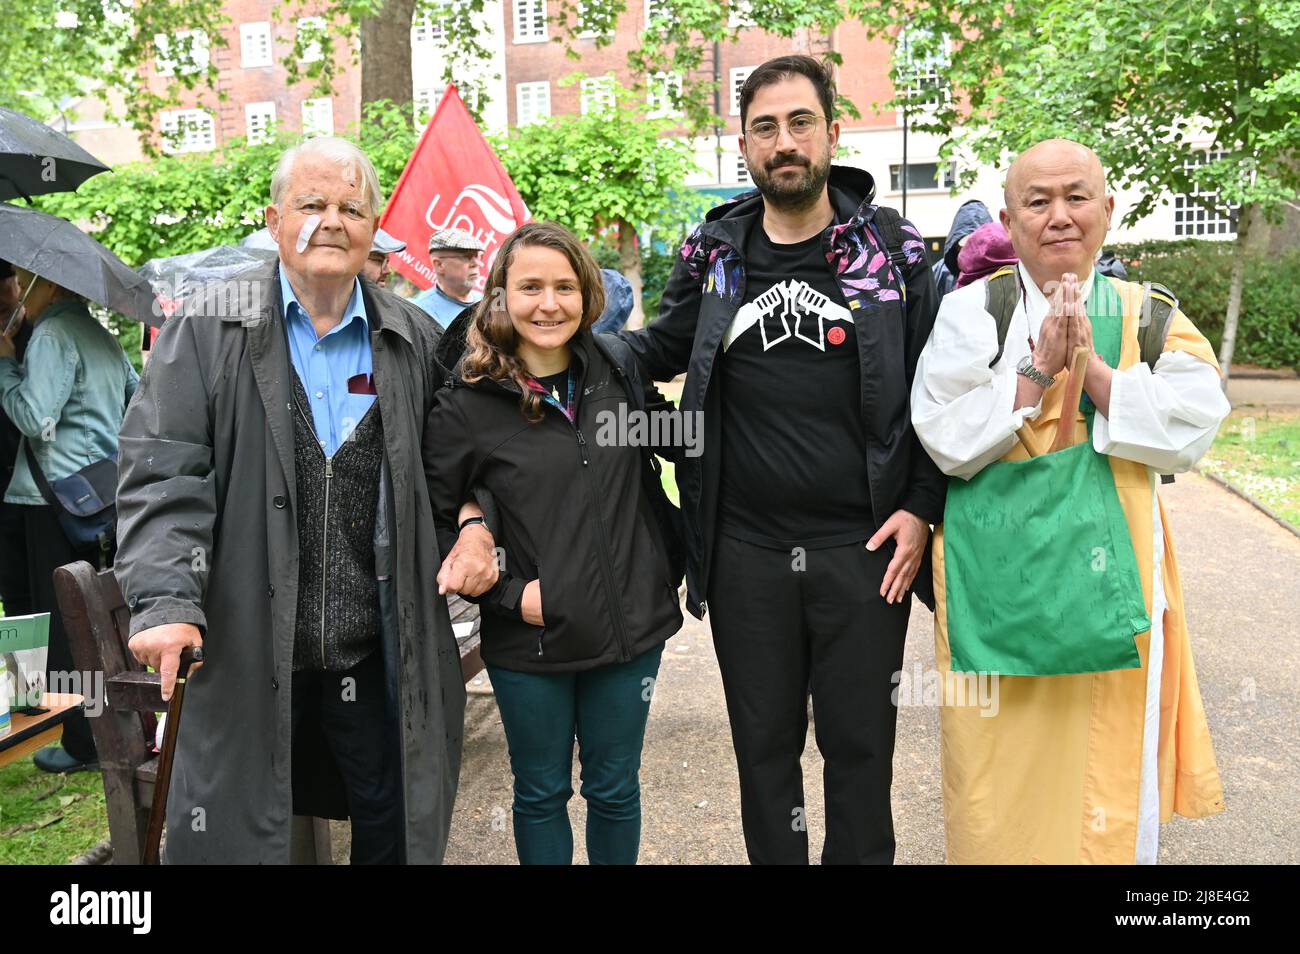 London, UK. 15th May, 2022. . 15th May, 2022. Bruce Kent, Sahar Vardi, Semih Sapmaz and Japanese monk attended the International Conscientious Objectors' Day both past and present. Around the world many people are imprisoned or forced to flee their home countries for refusing to join the armed forces 'CO-Day National Ceremony' at Tavistock Square, London, UK. - 15 May 2022. Credit: Picture Capital/Alamy Live News Credit: Picture Capital/Alamy Live News Stock Photo